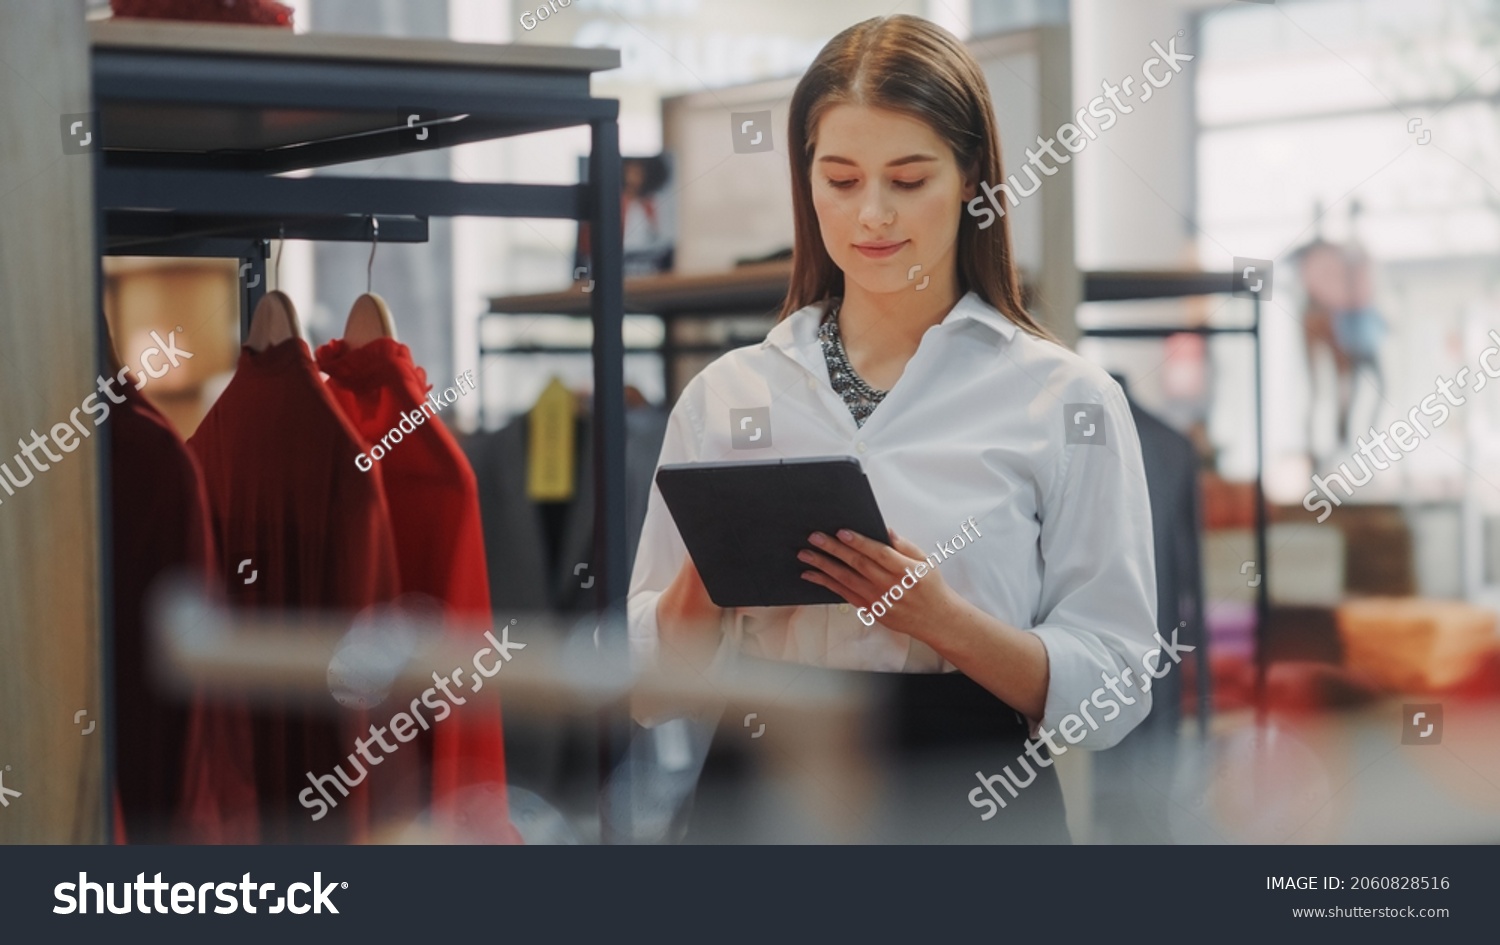 Clothing Store: Female Visual Merchandising Specialist Uses Tablet Computer To Create Stylish Collection. Fashion Shop Sales Retail Manager Checks Stock. Small Business Owner Orders Merchandise #2060828516